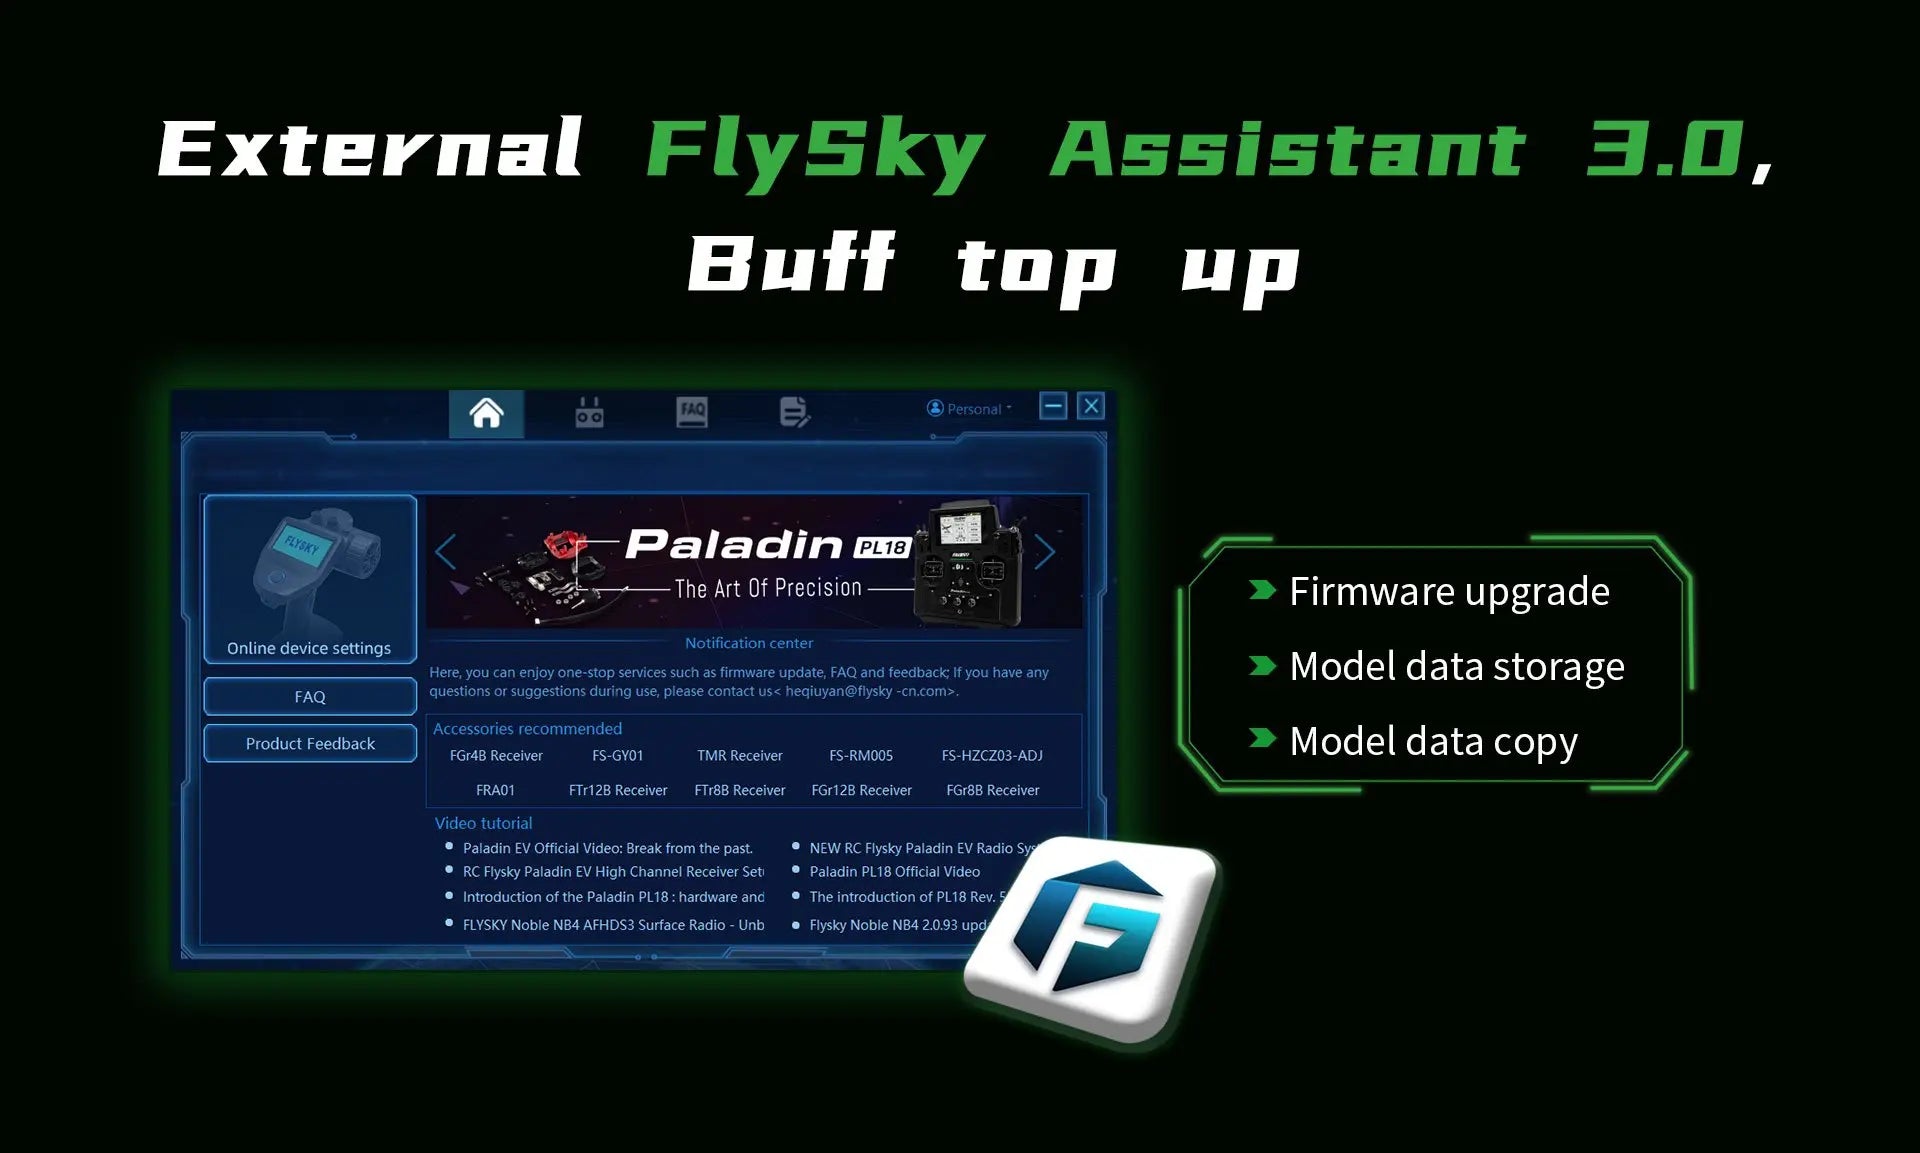 internal Flysky Assistant 3.0 Butf top up Fo 6, Personal Paladin PL18 The